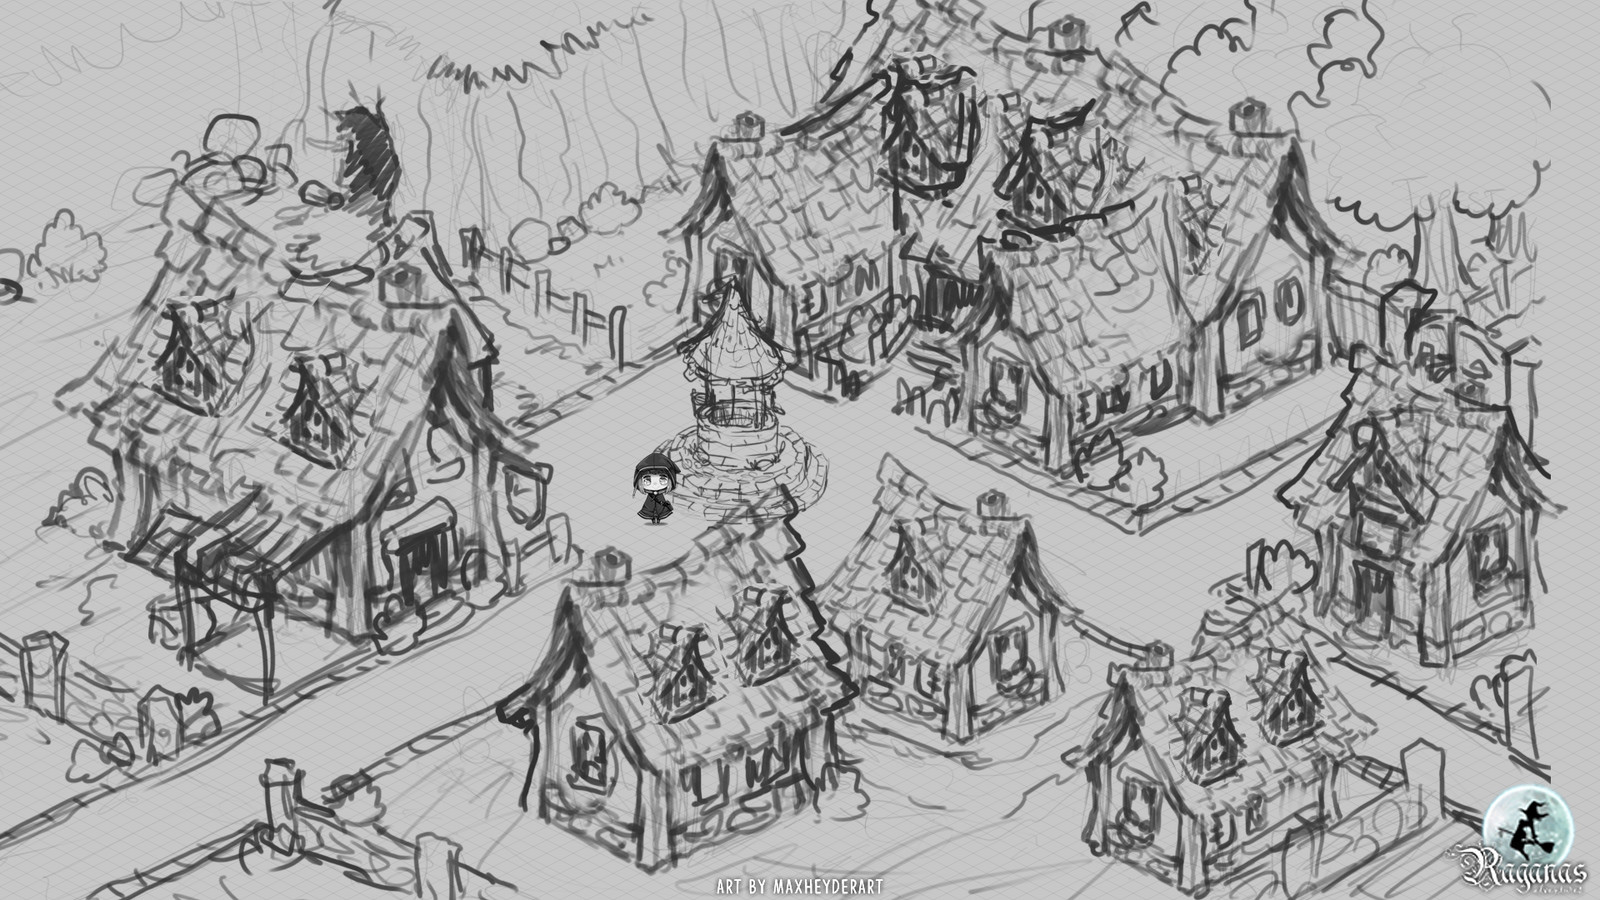 First sketch for the village.